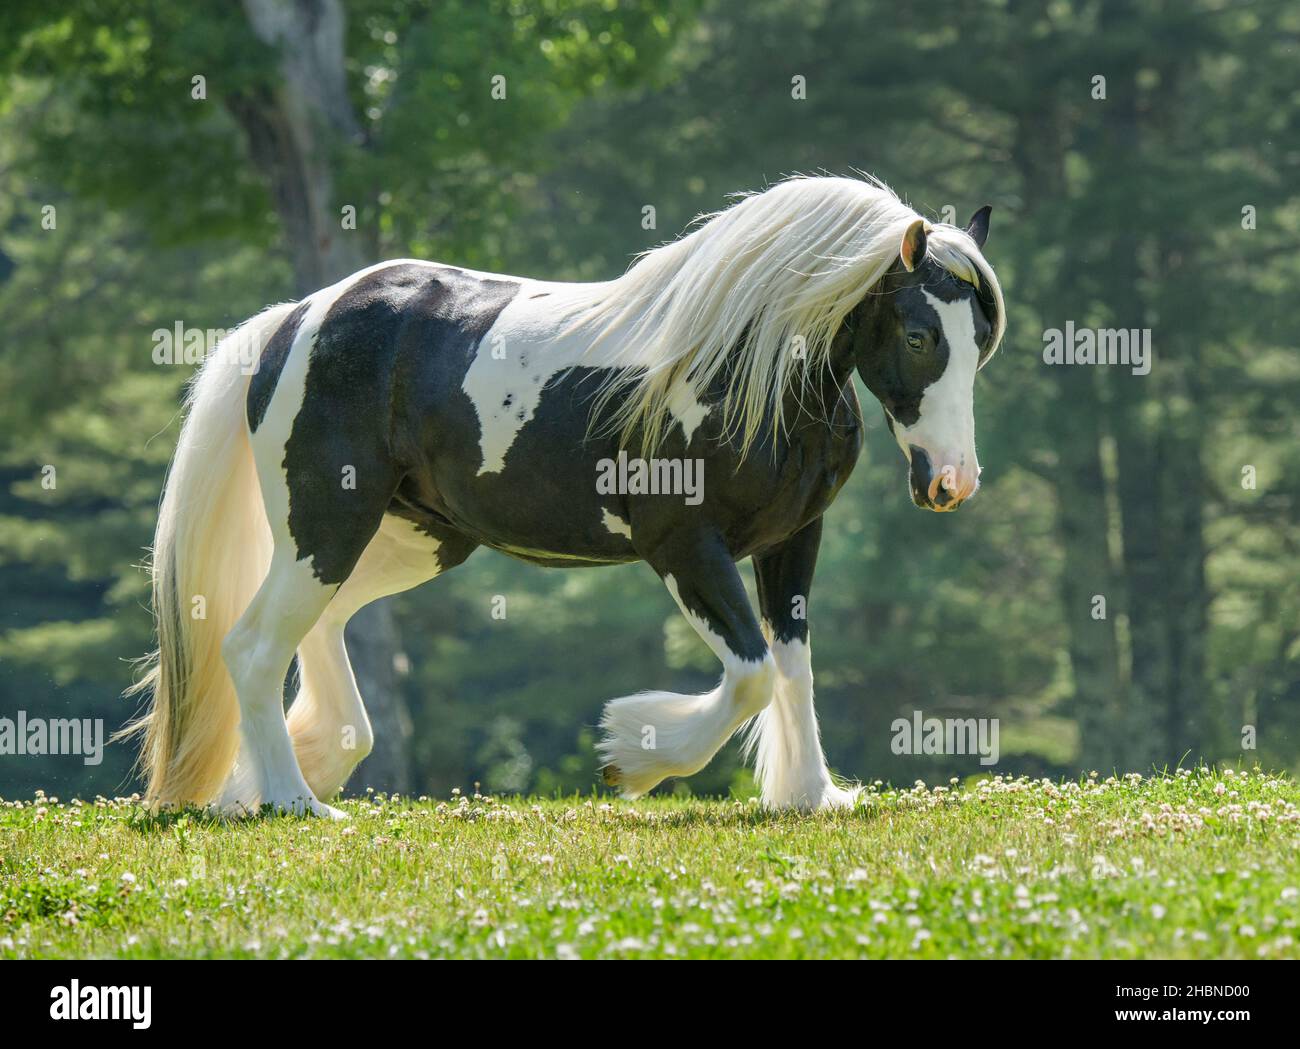 Gypsy Vanner Horse mare trots across grass knoll Stock Photo